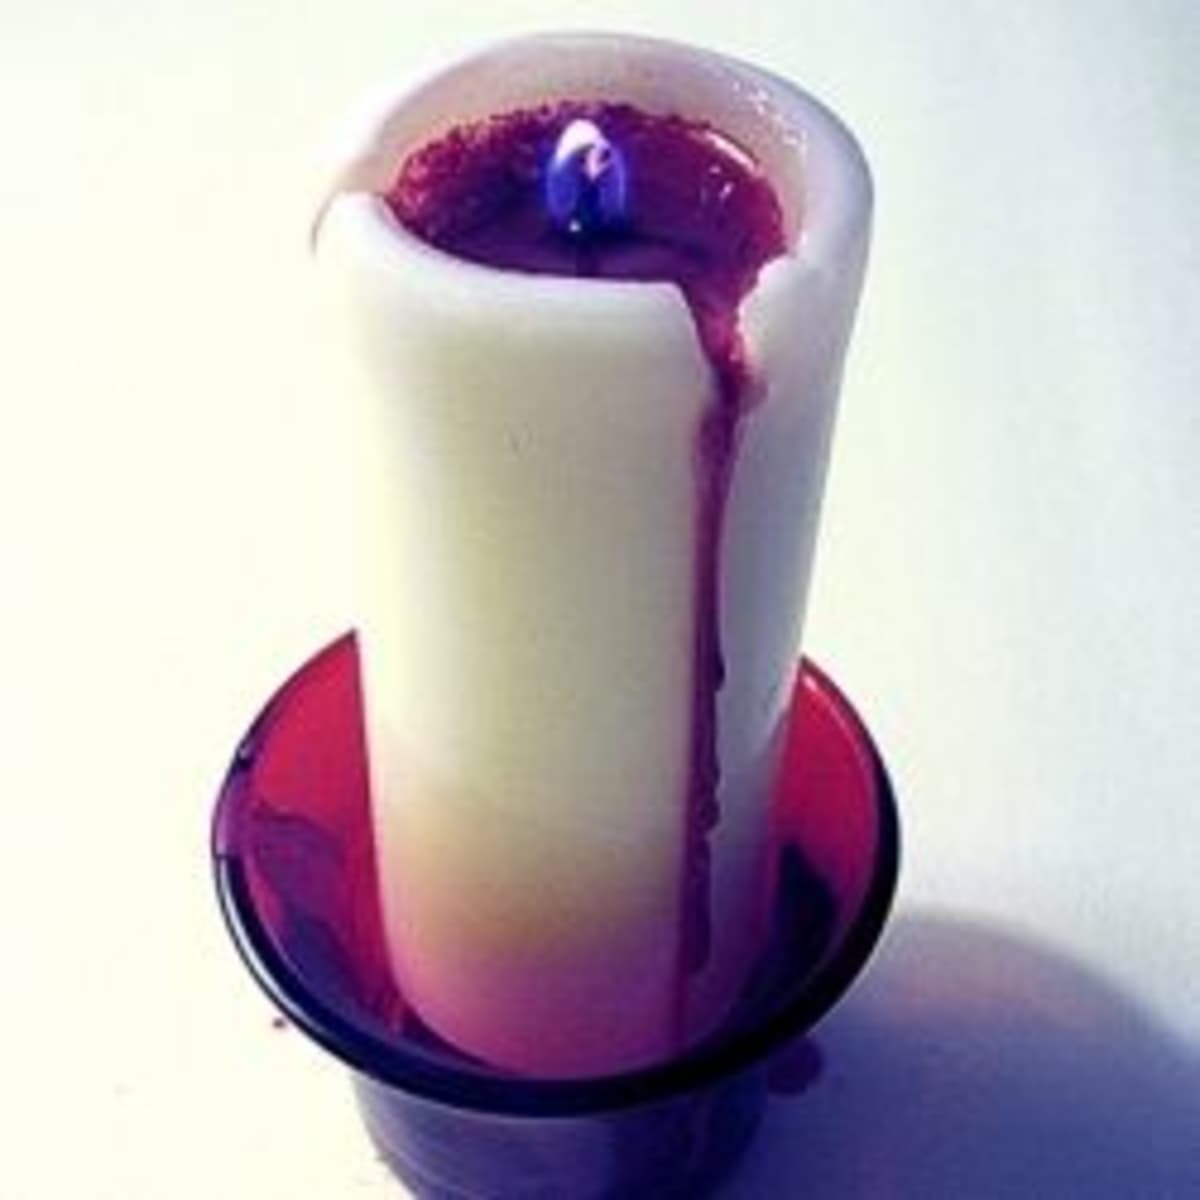 How do you make gel candles? : r/candlemaking